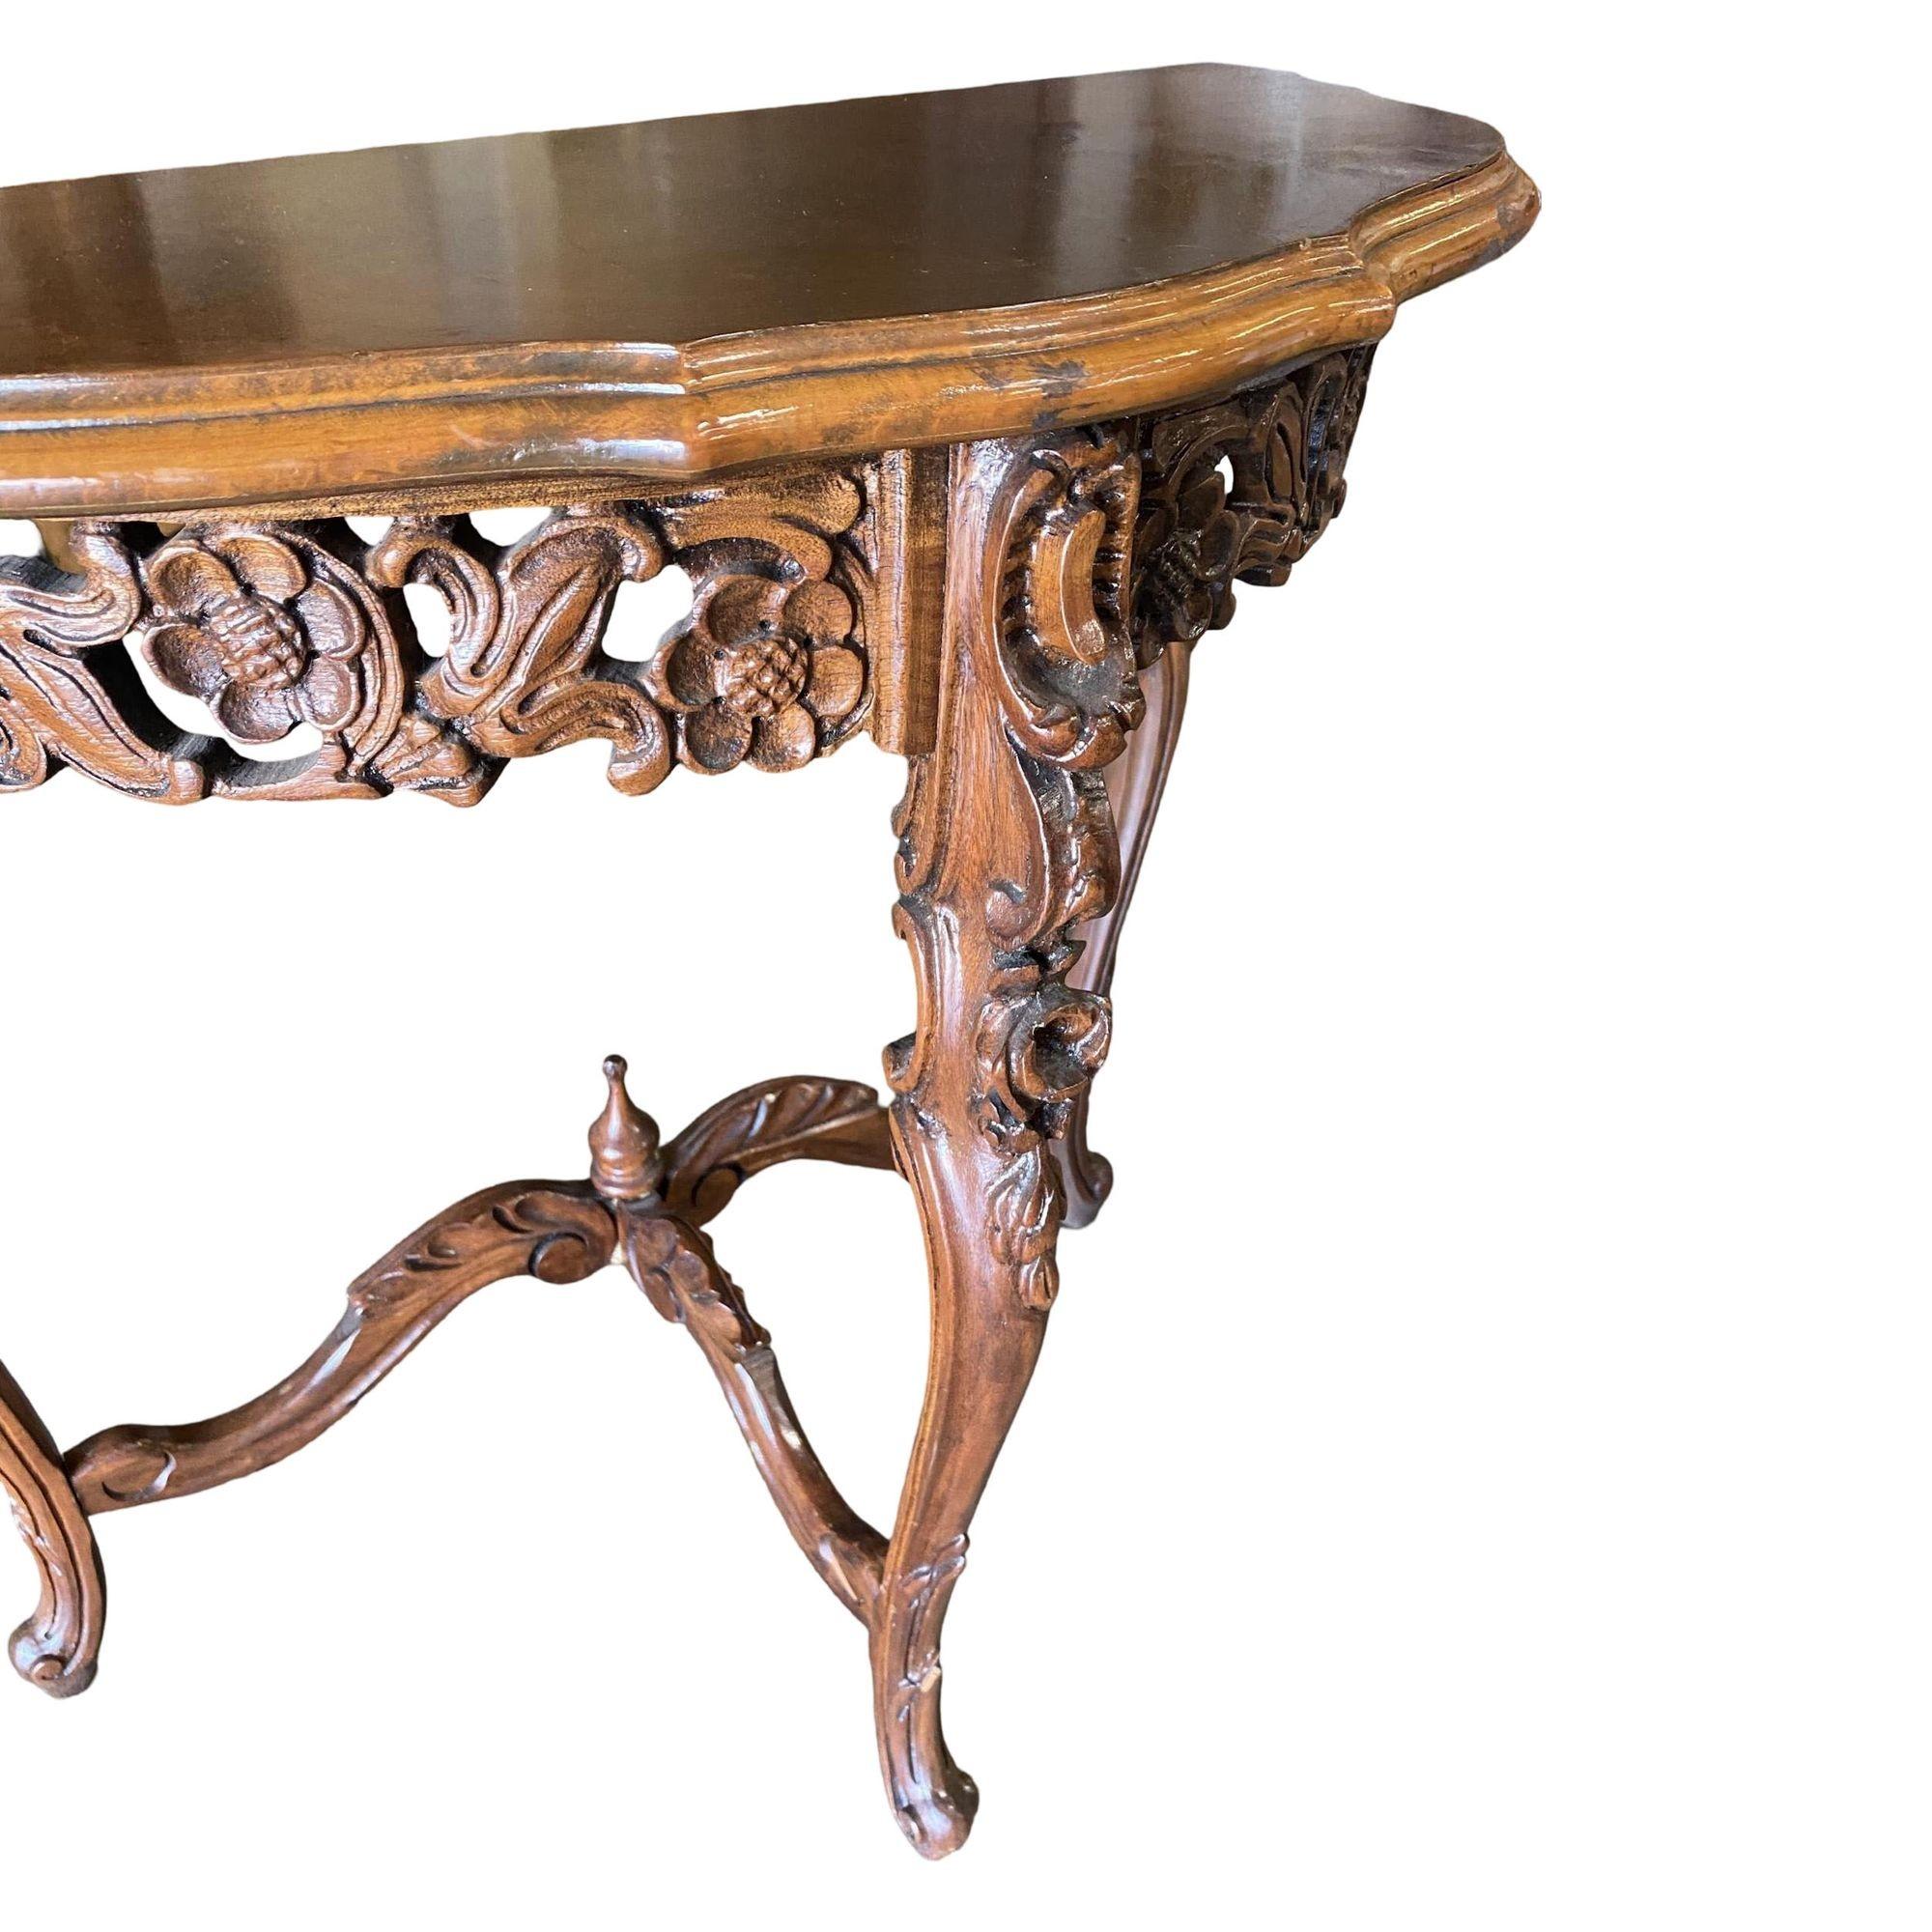 Carved Maple Queen Anne Victorian Console Table, circa 1880 In Excellent Condition For Sale In Van Nuys, CA